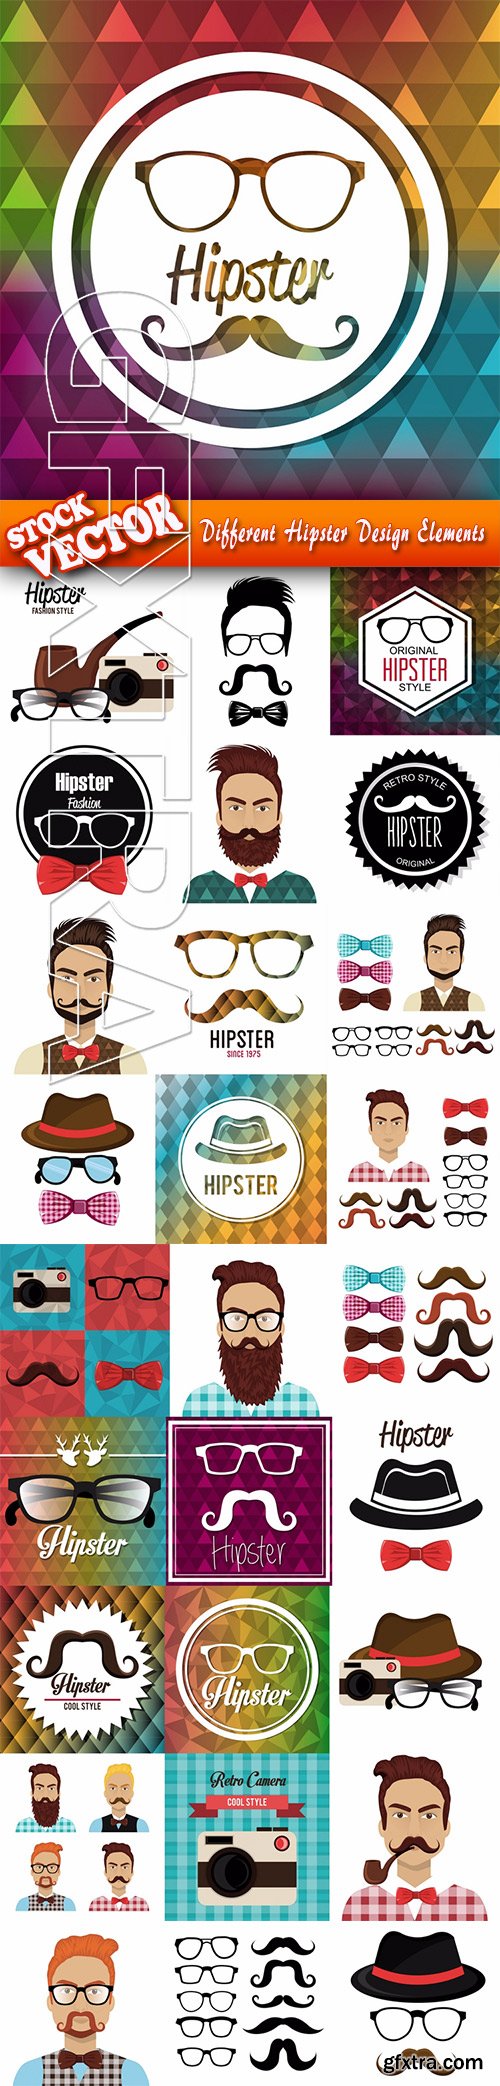 Stock Vector - Different Hipster Design Elements